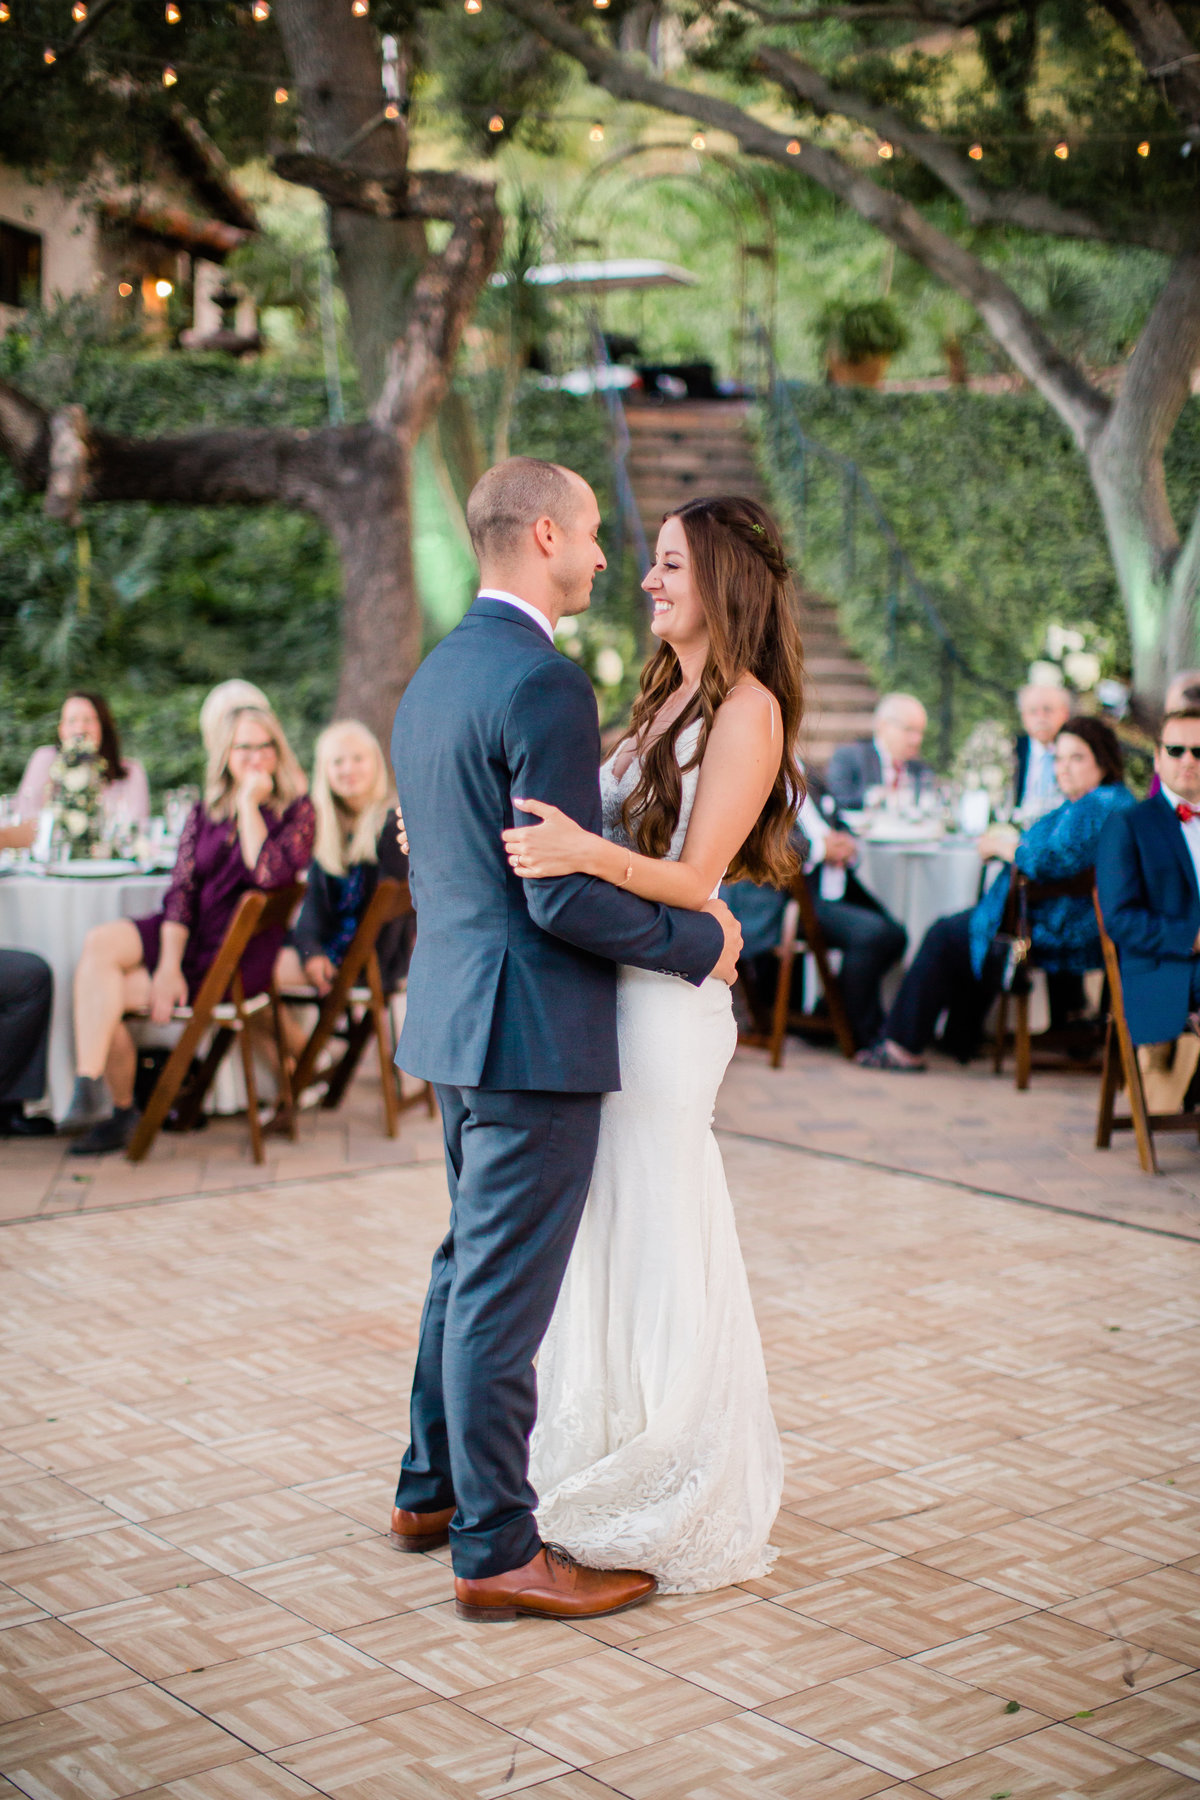 Paige & Thomas are Married| Circle Oak Ranch Wedding | Katie Schoepflin Photography739